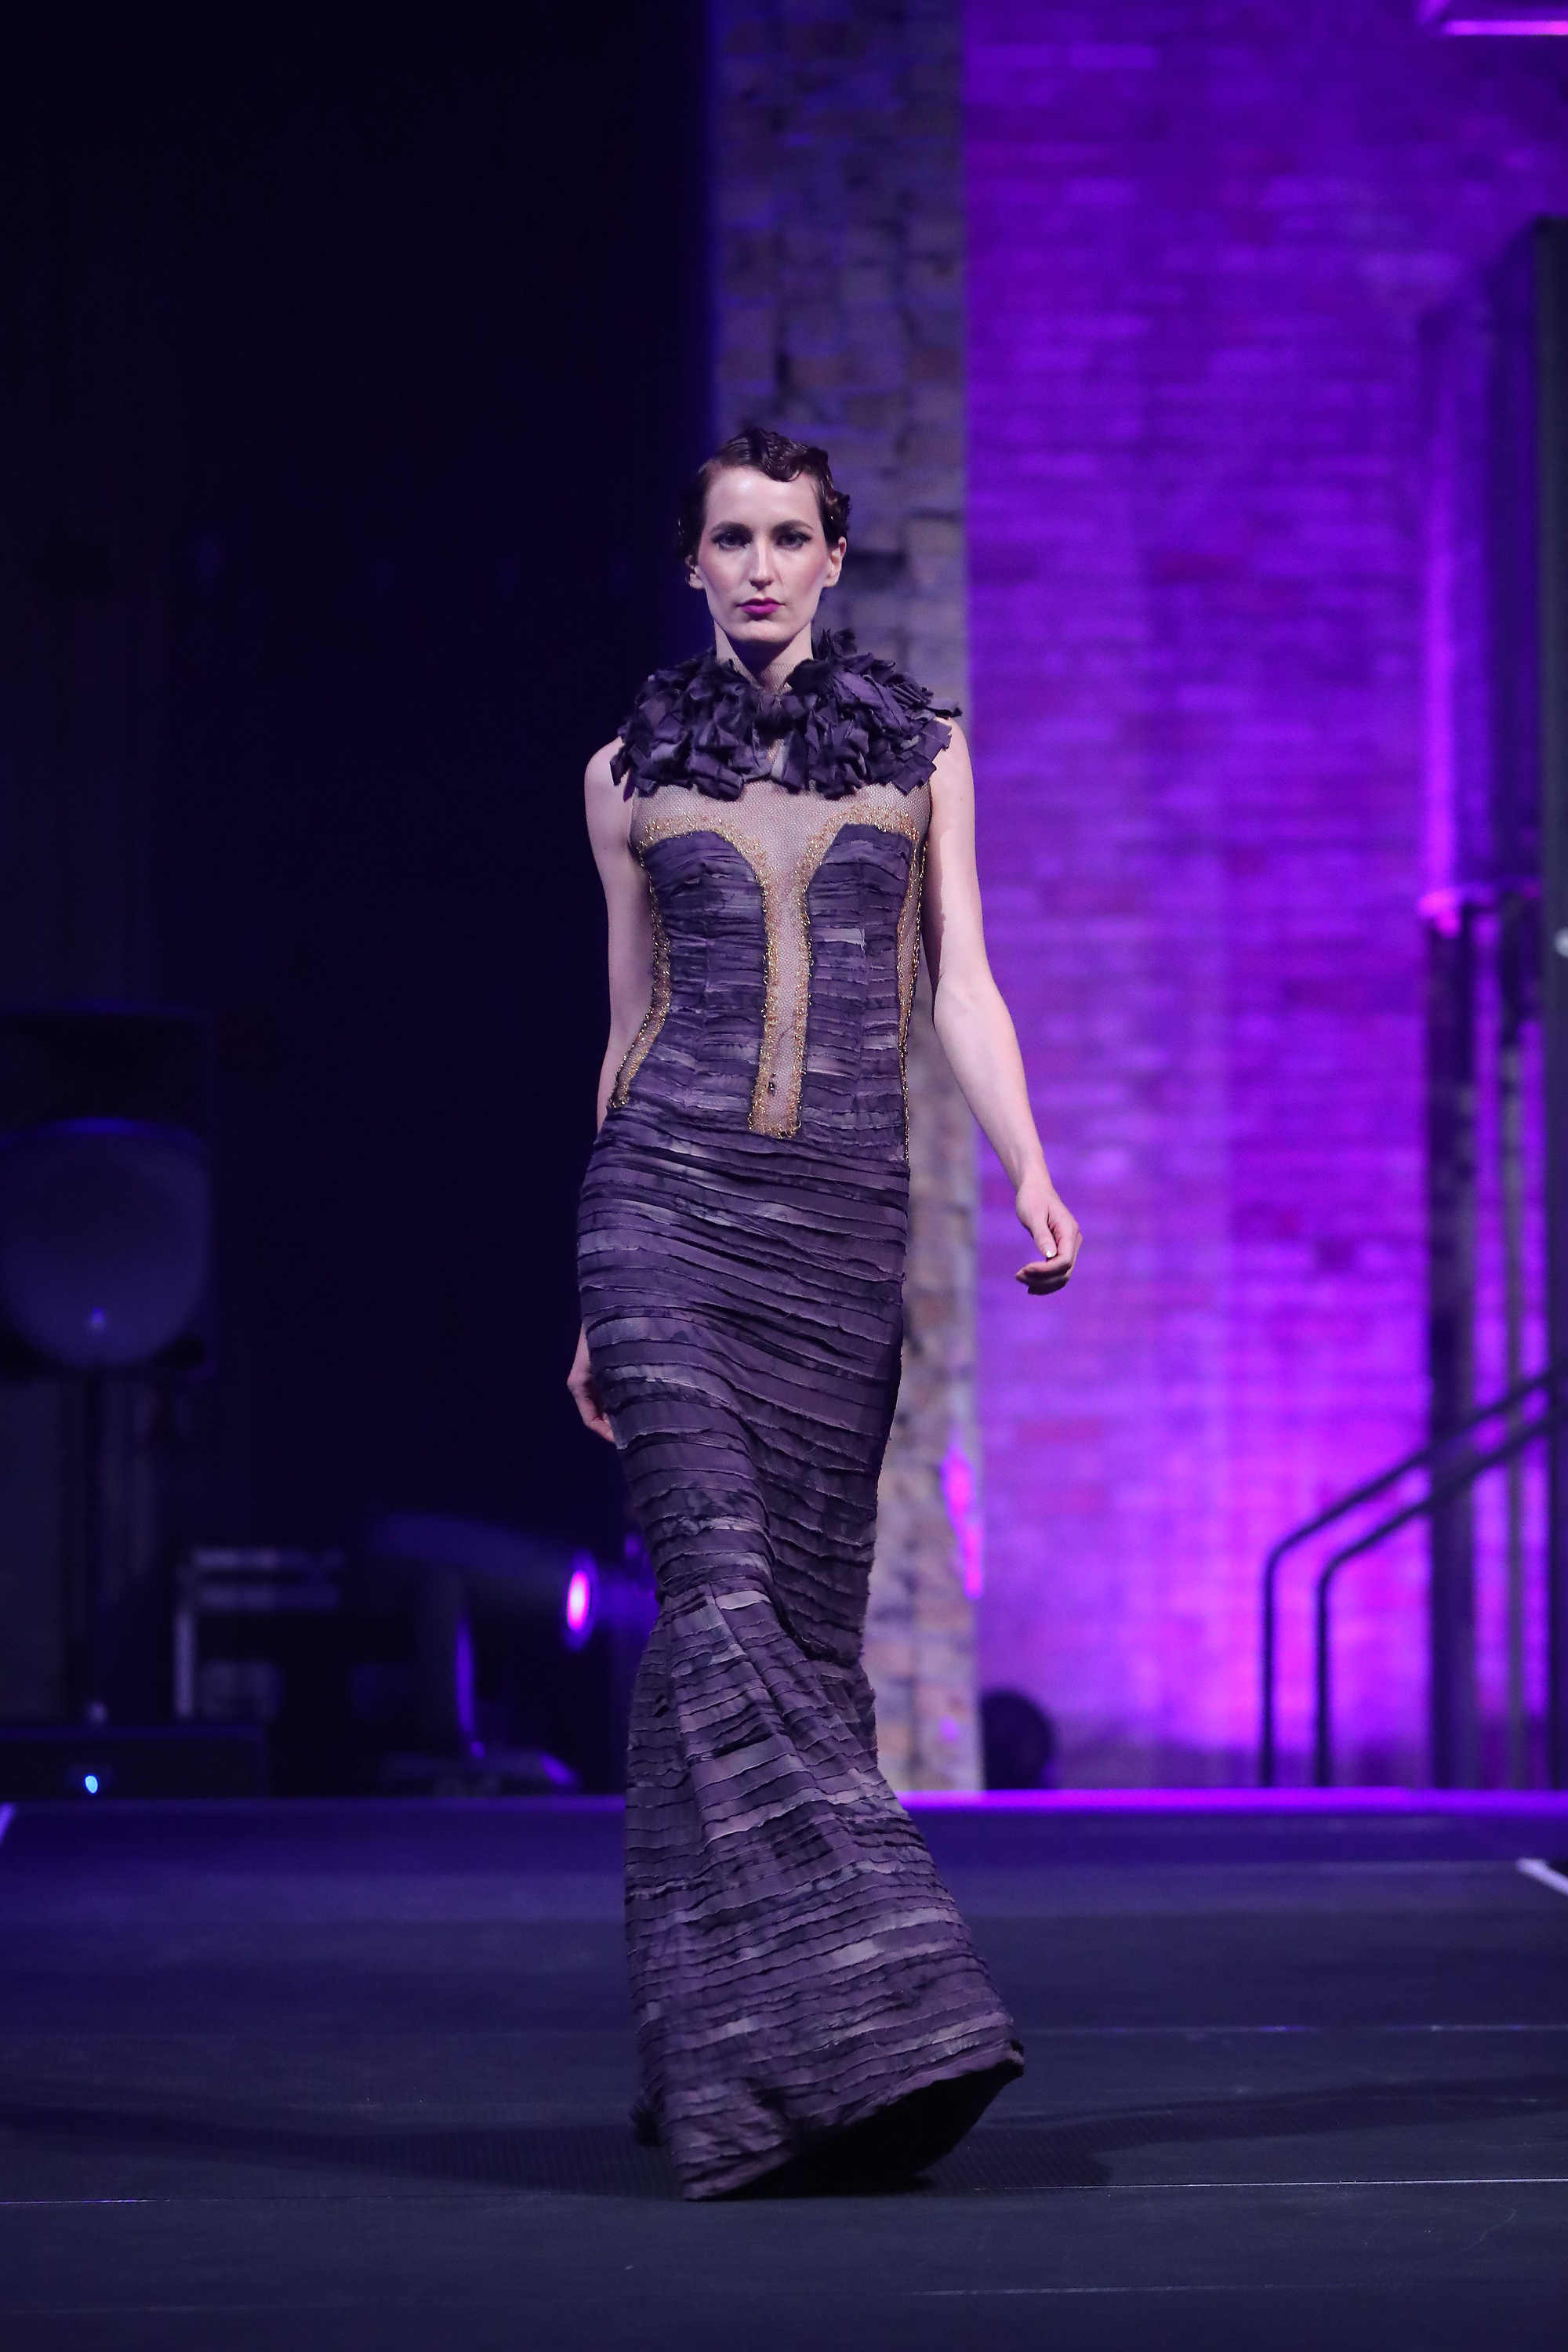 Fashion Designers Pay Homage to Prince in Minneapolis | Business Wire